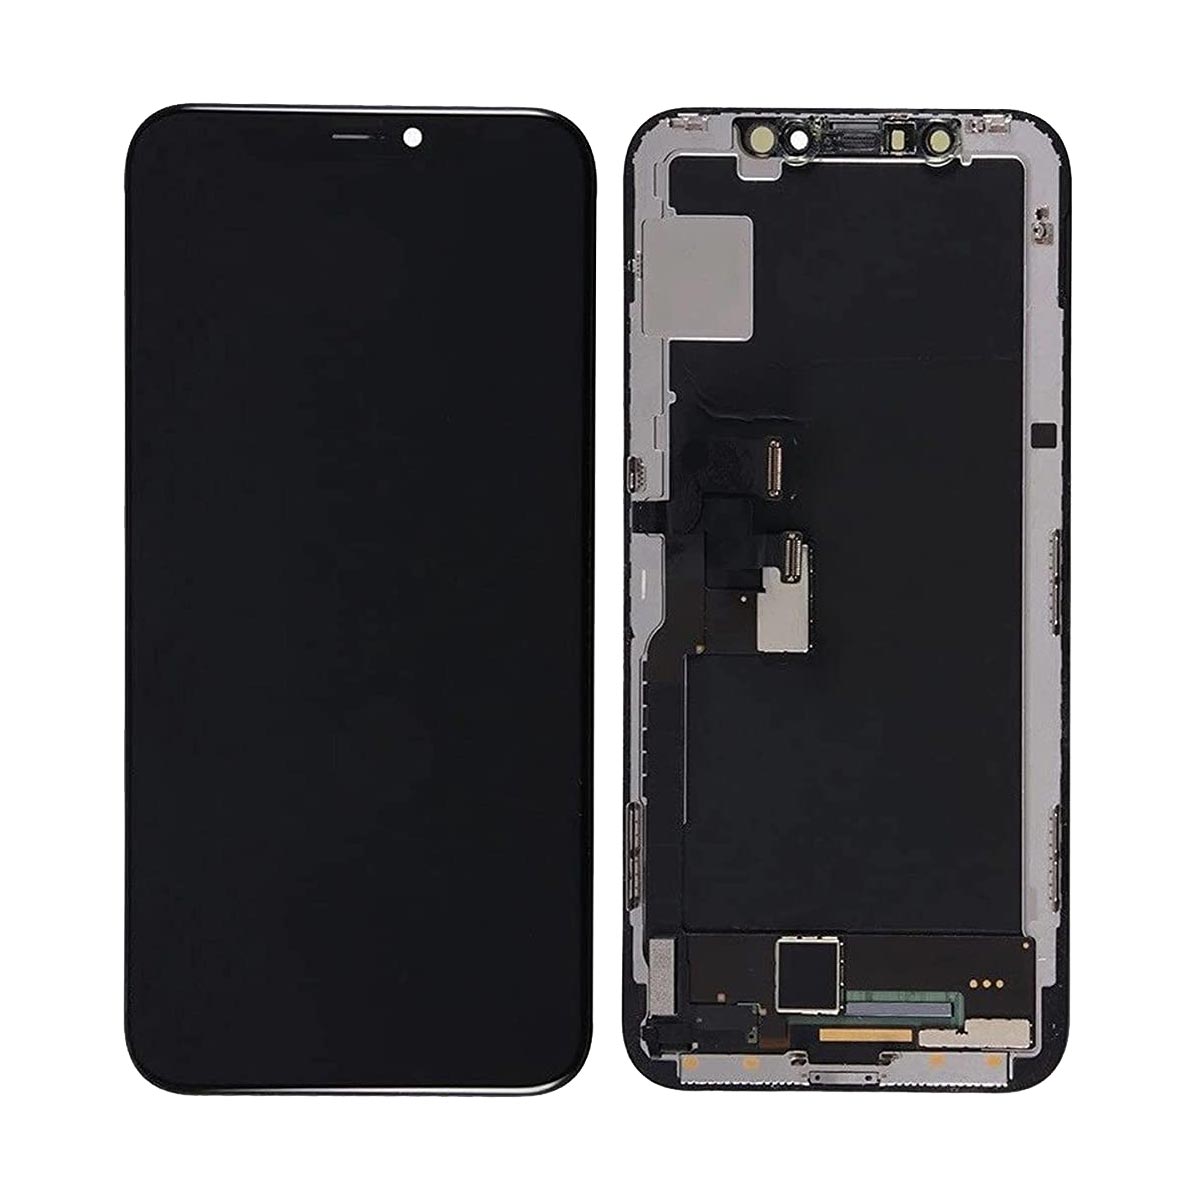 Geardo Premium LCD Digitizer Screen Assembly with Frame for iPhone X Hard OLED